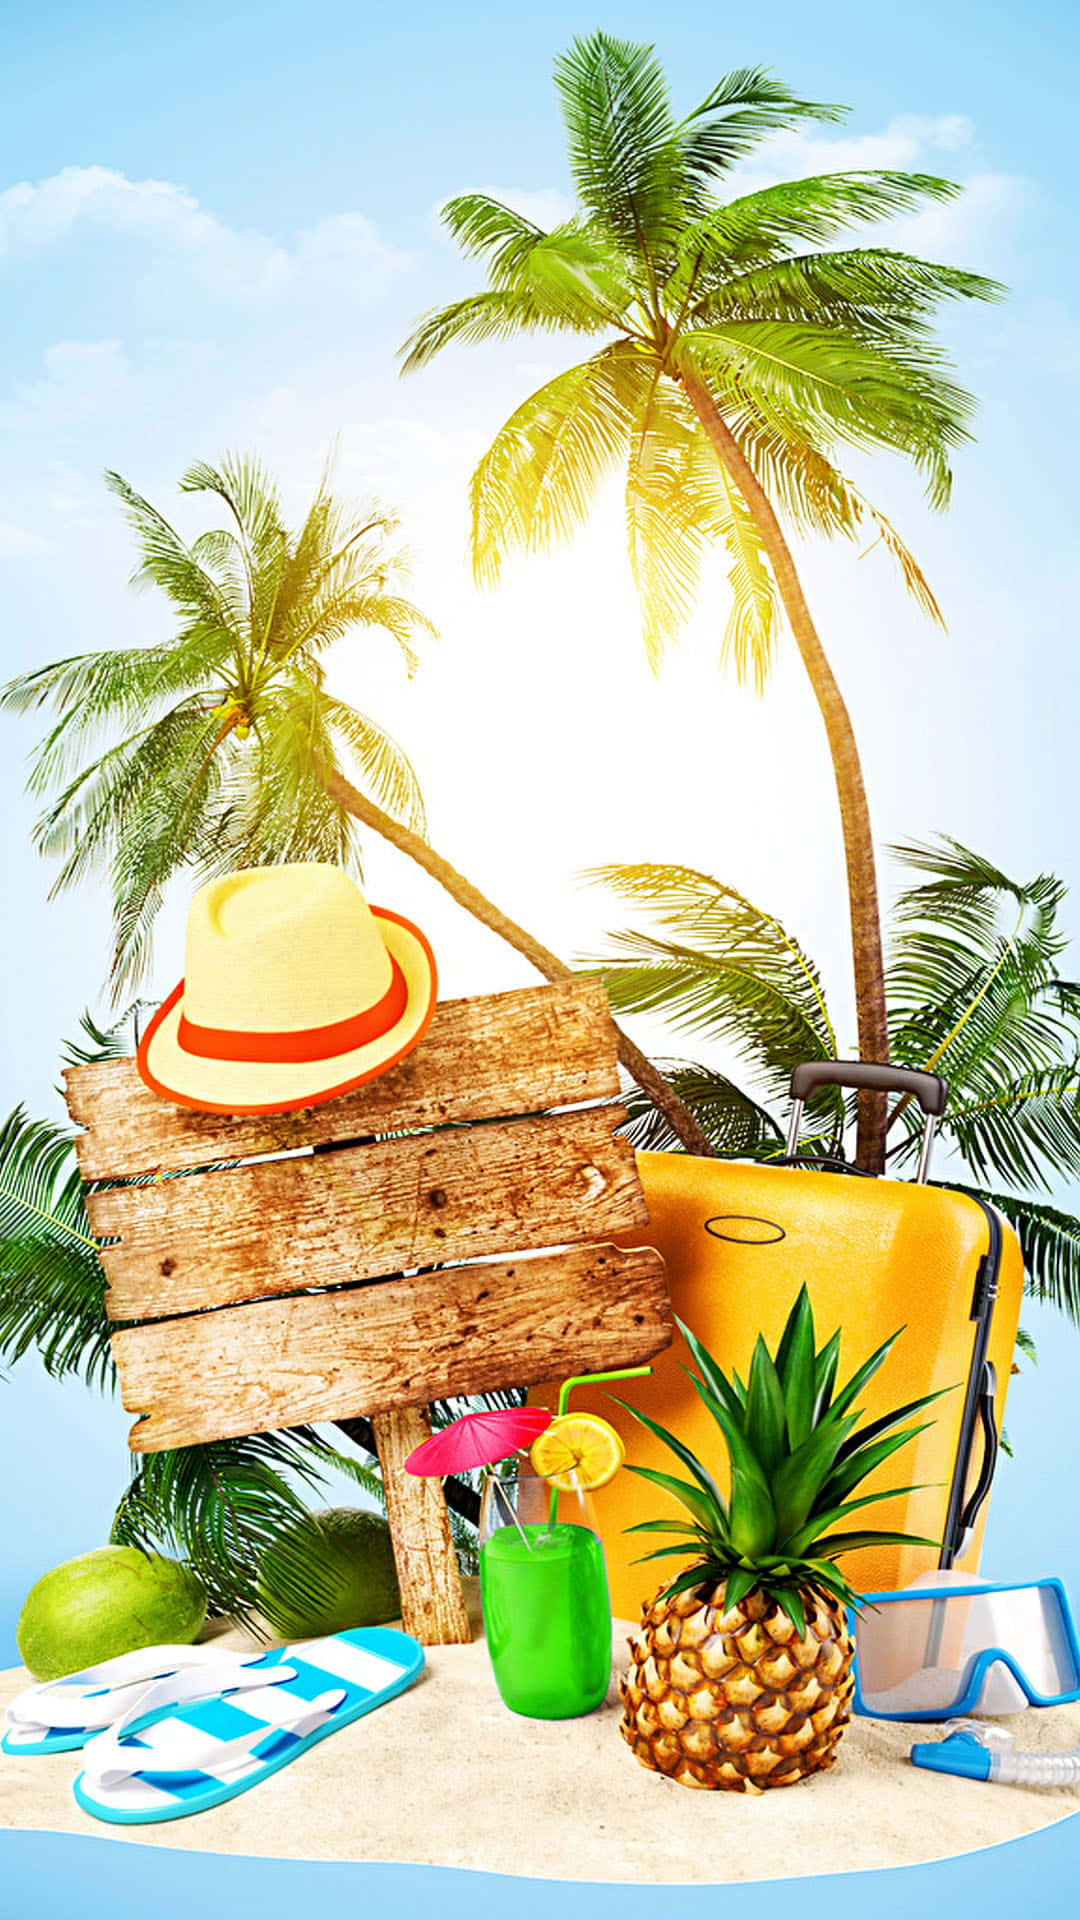 Soak up the sun with a stylish beach hat! Wallpaper